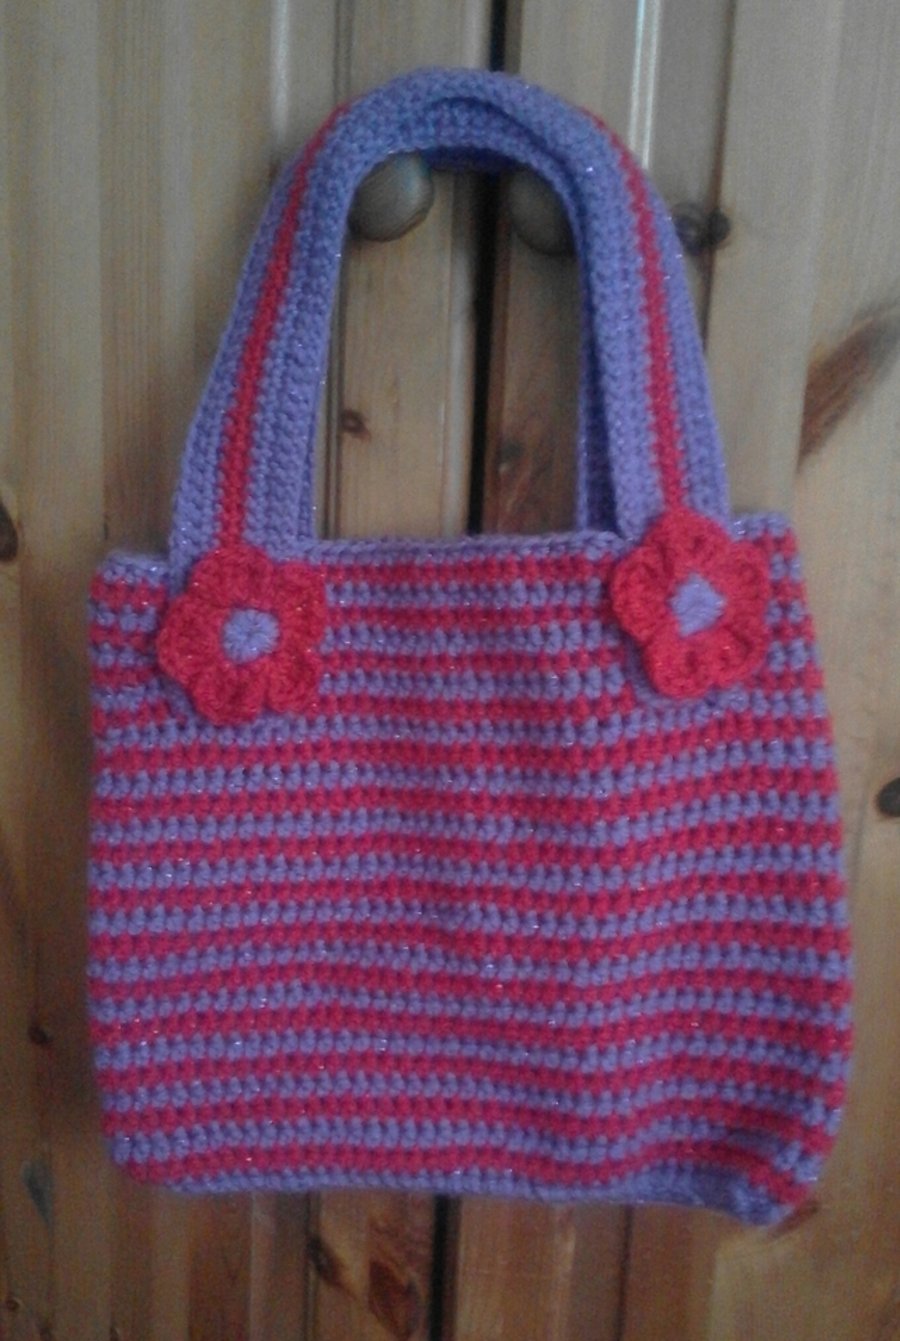 Gorgeous sparkly crocheted bag